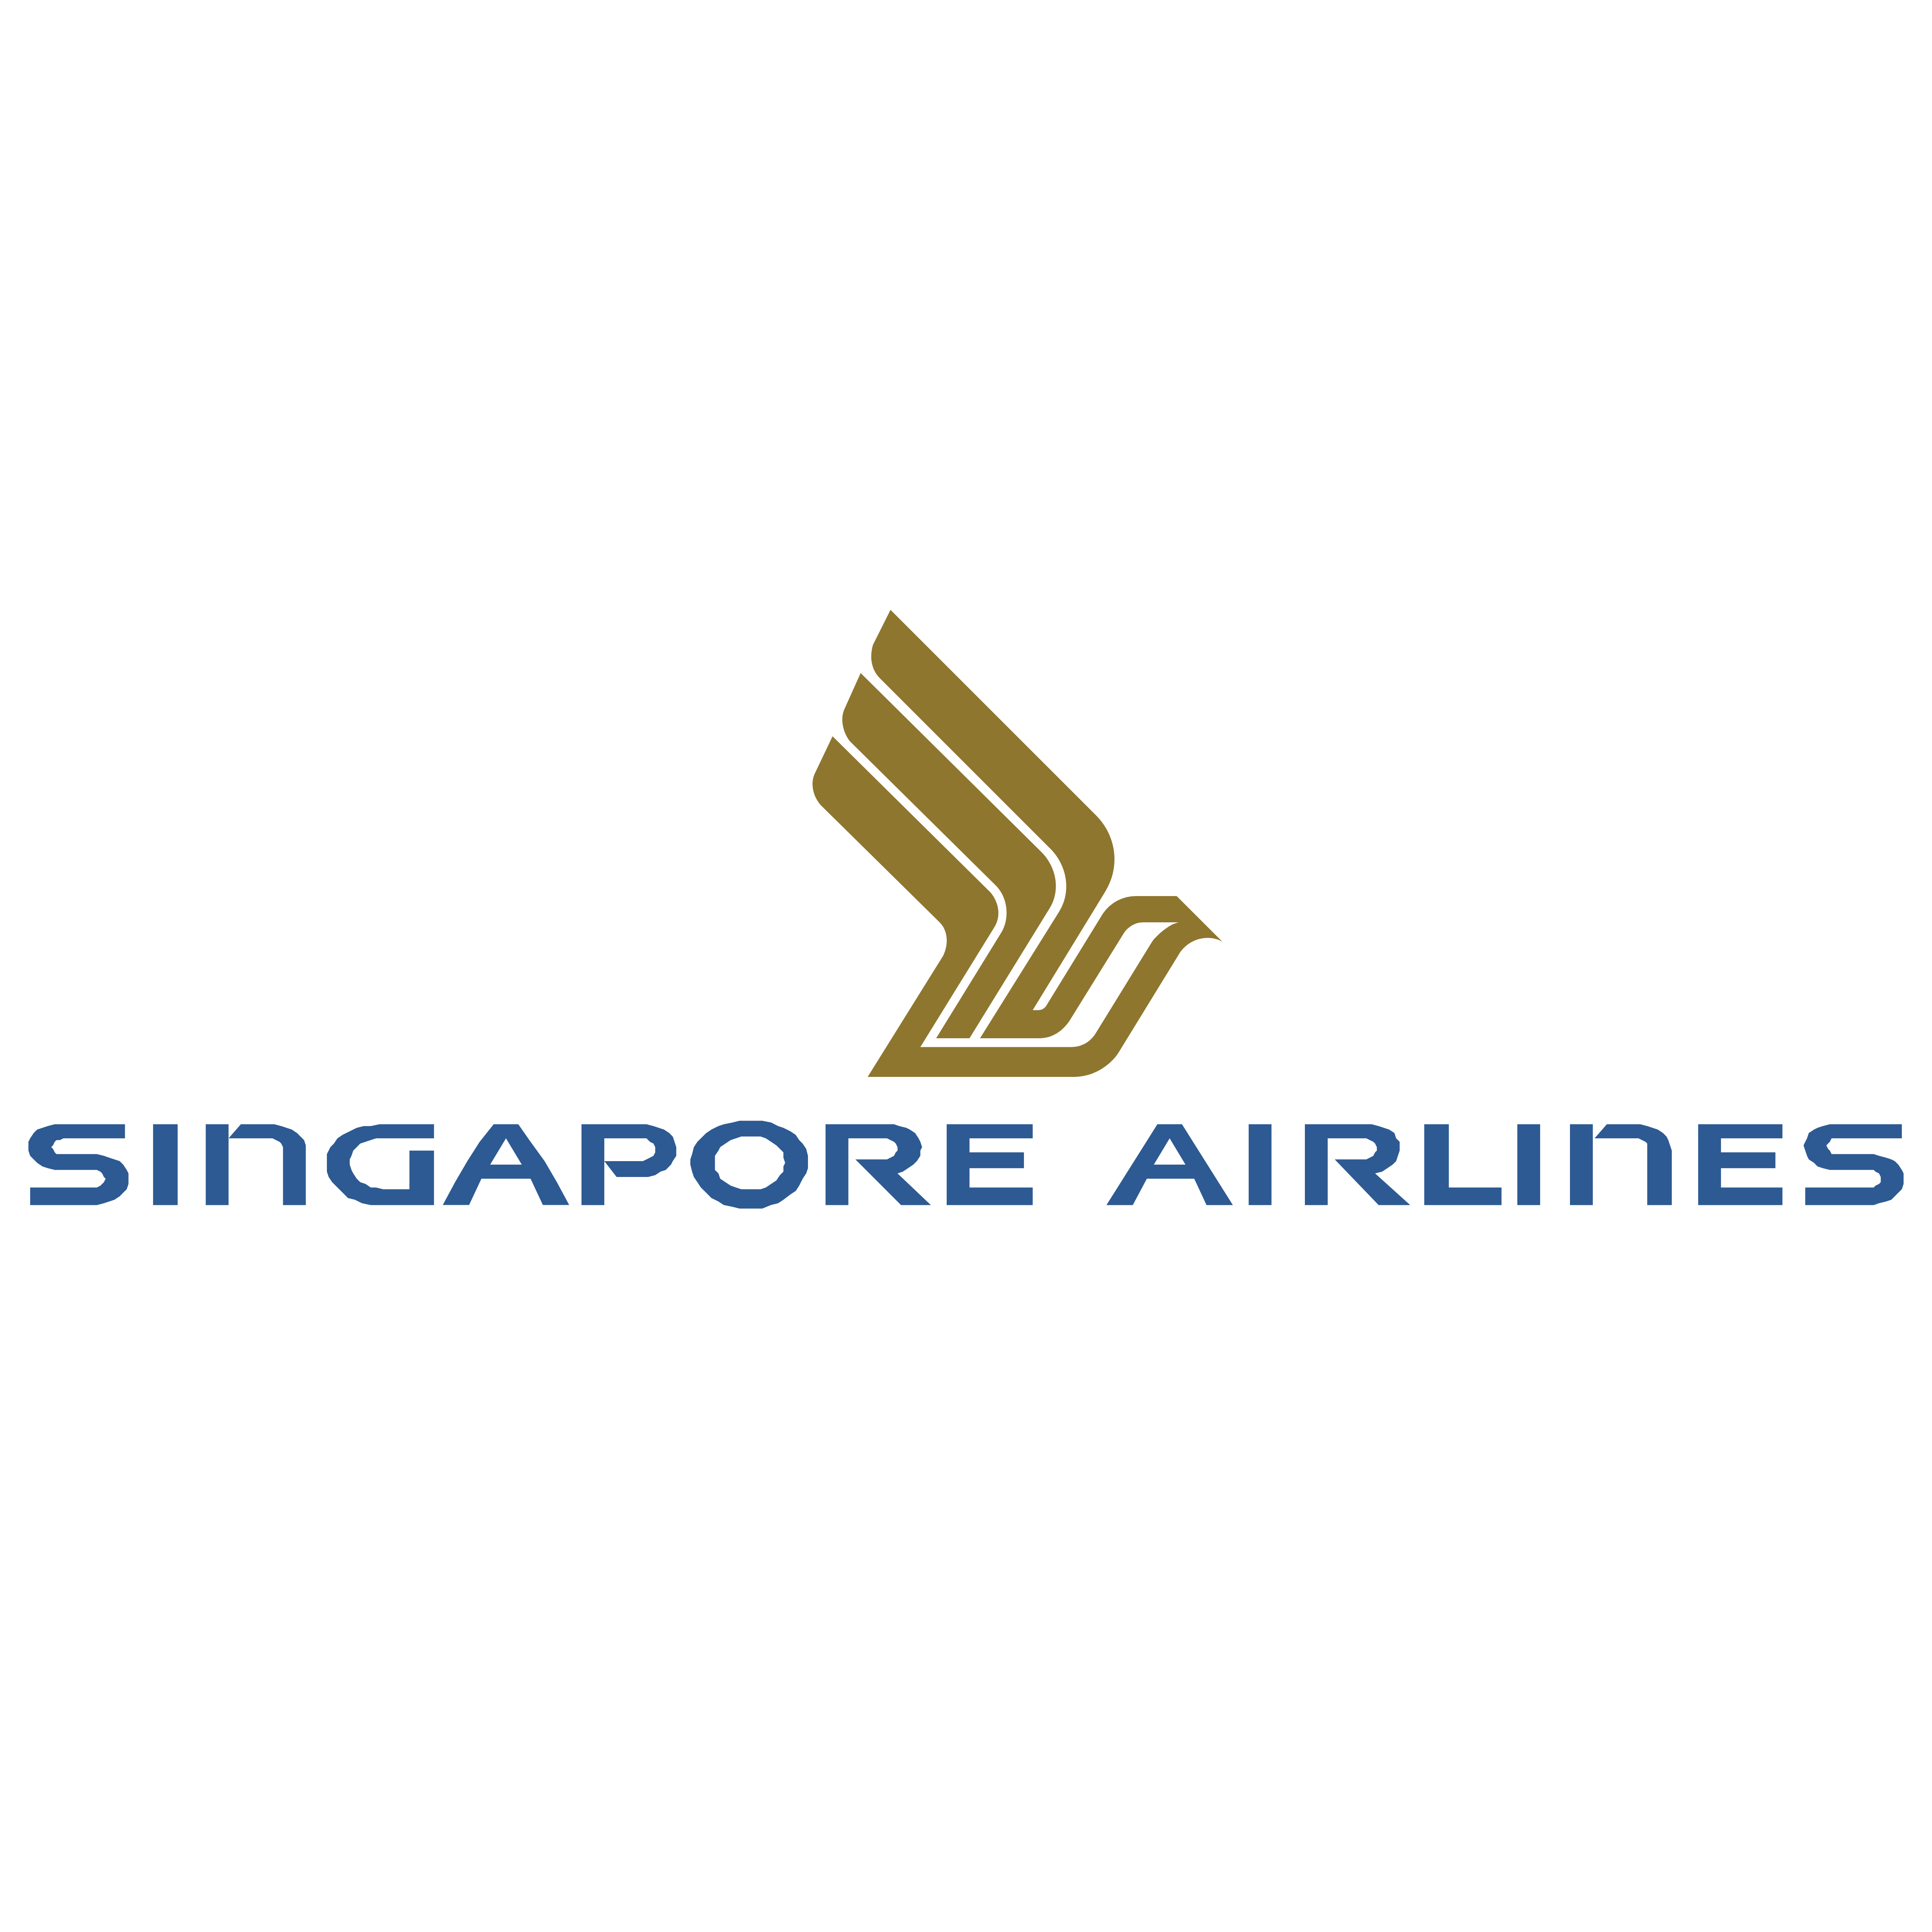 Singapore Airlines – Logos Download